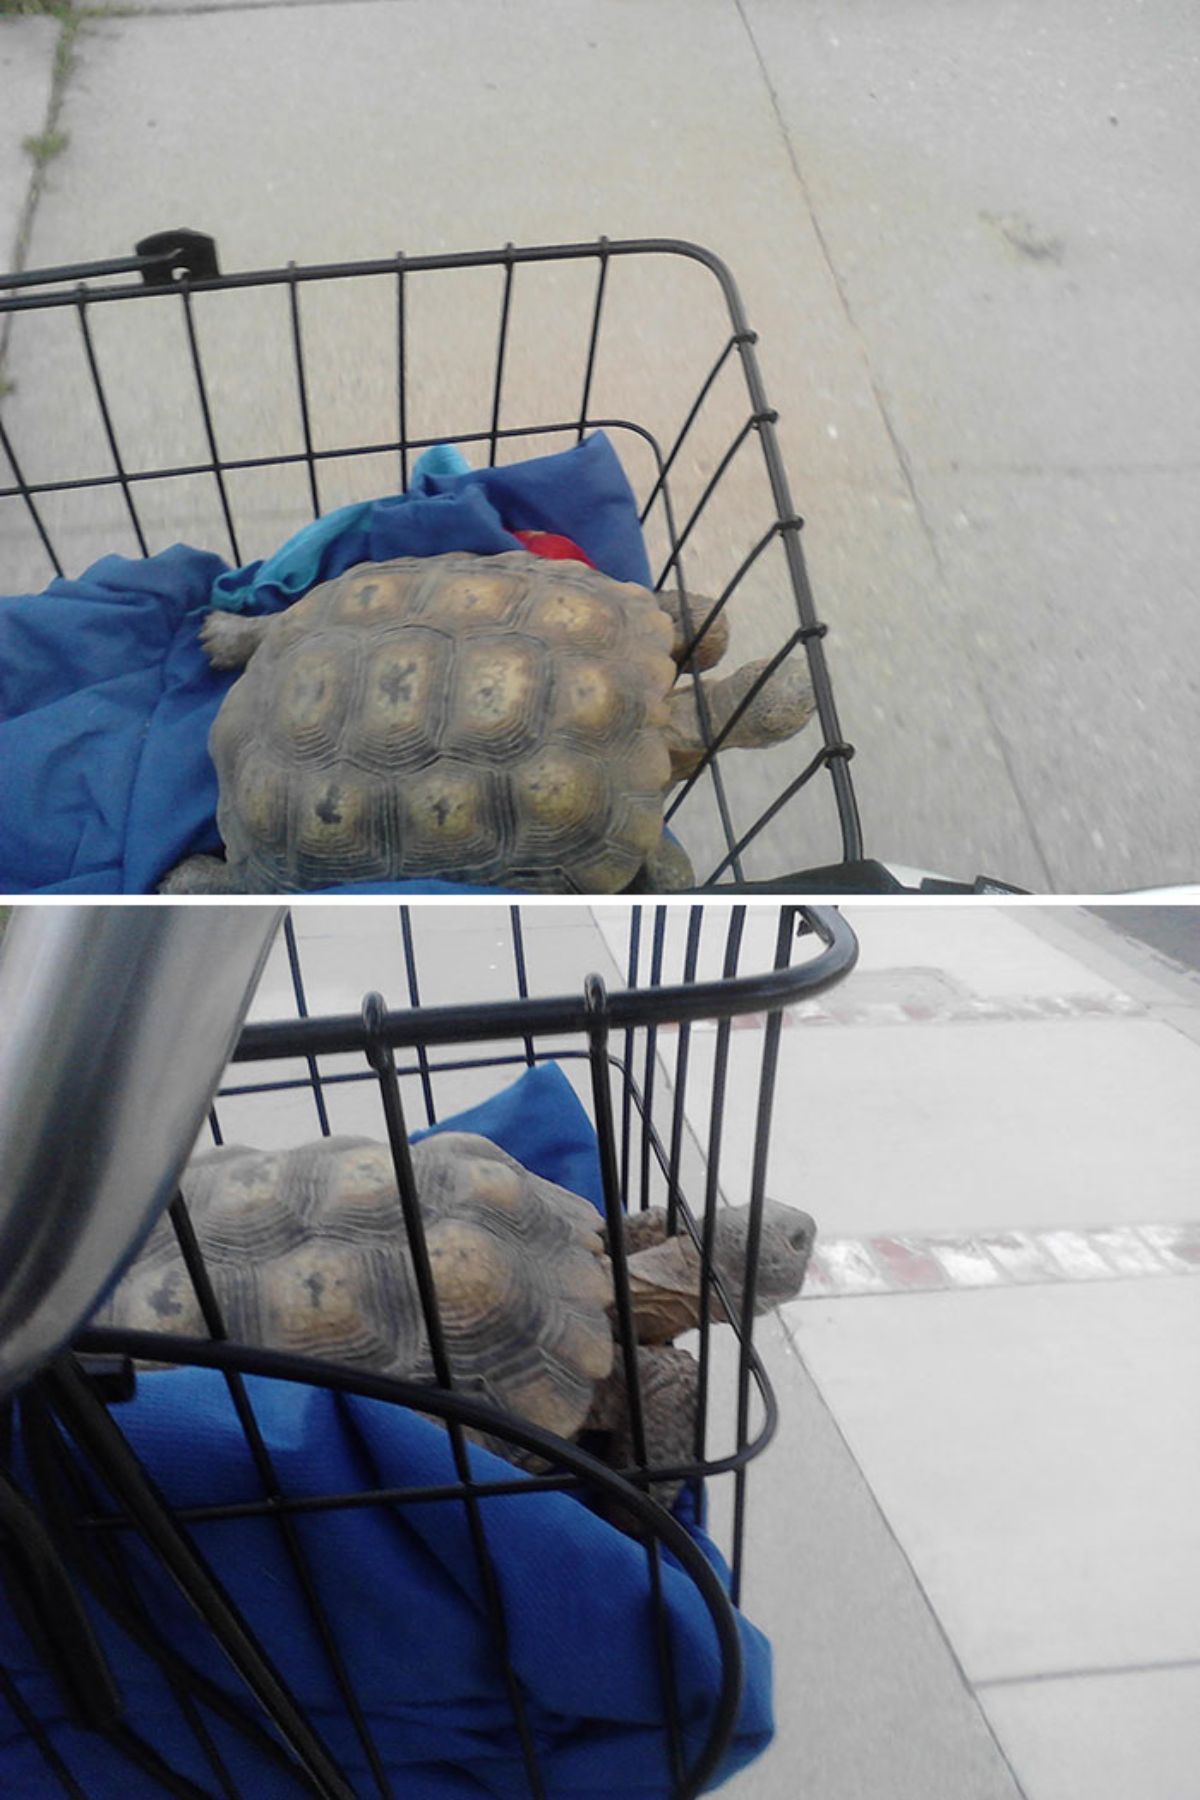 2 photos of a tortoise laying in a bike basket being taken on a bike ride